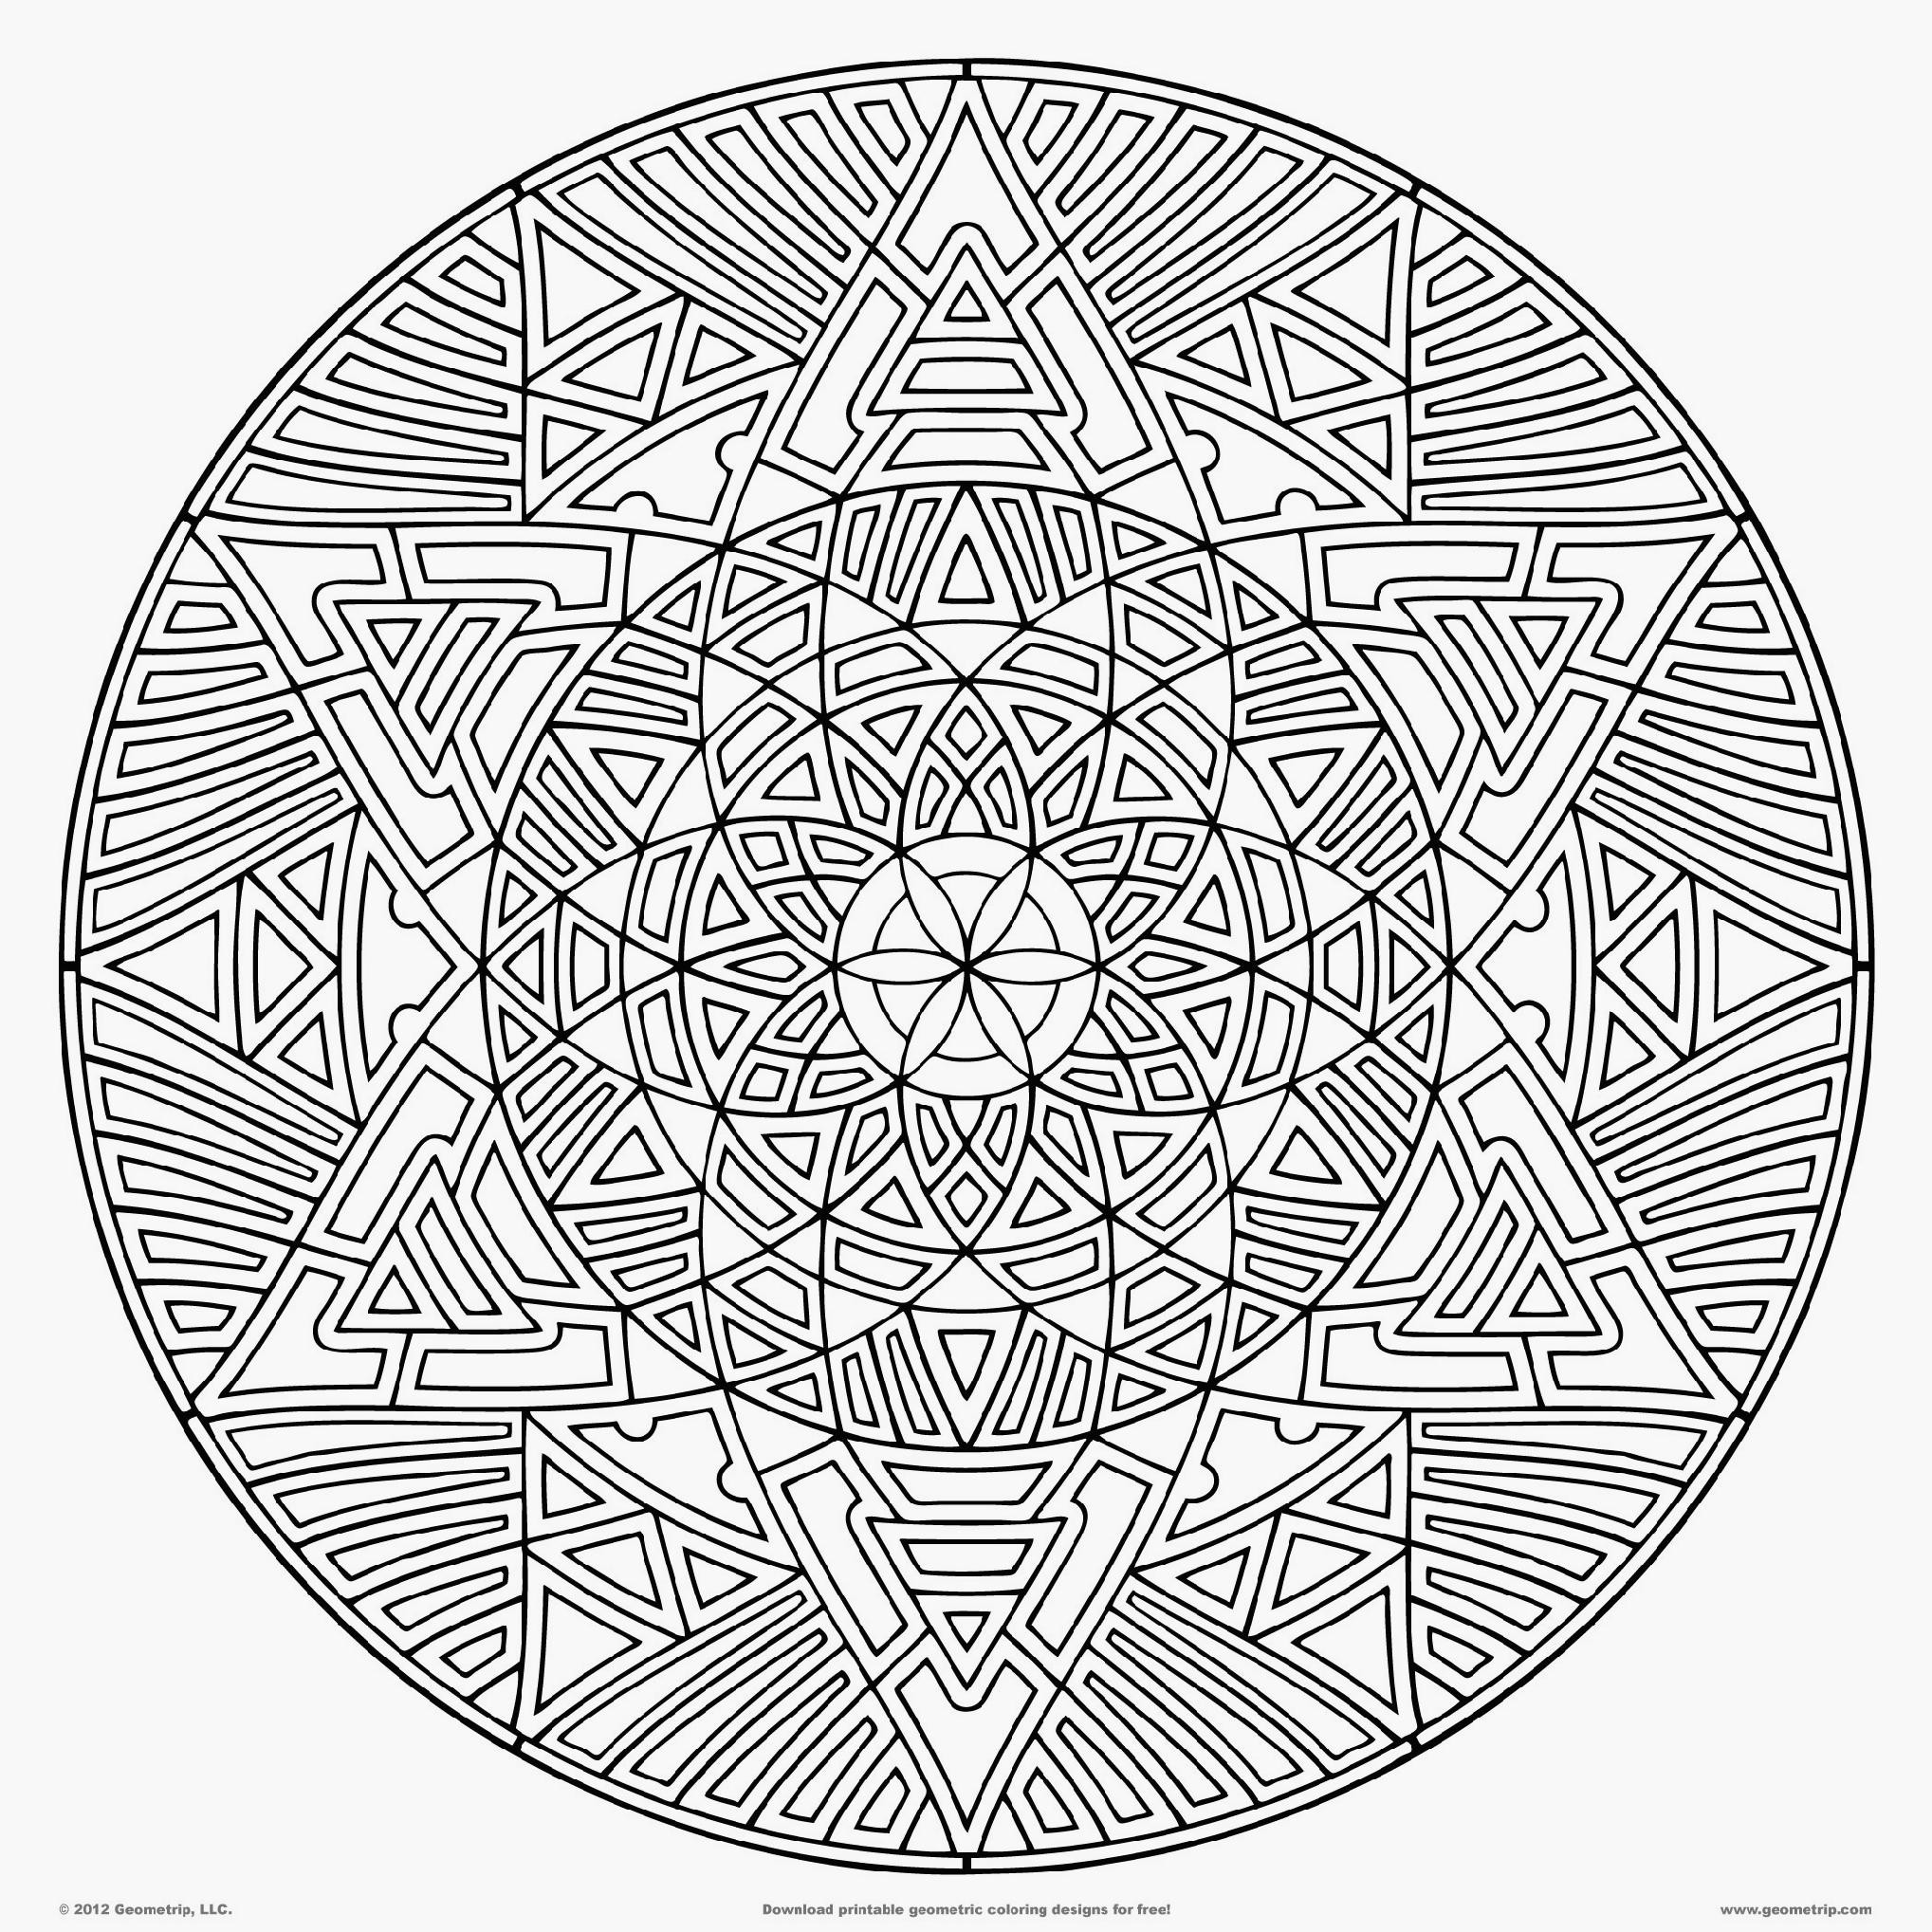 Mandala Coloring Pages Pdf
 Coloring Pages Mandala Coloring Page Flower Mandala